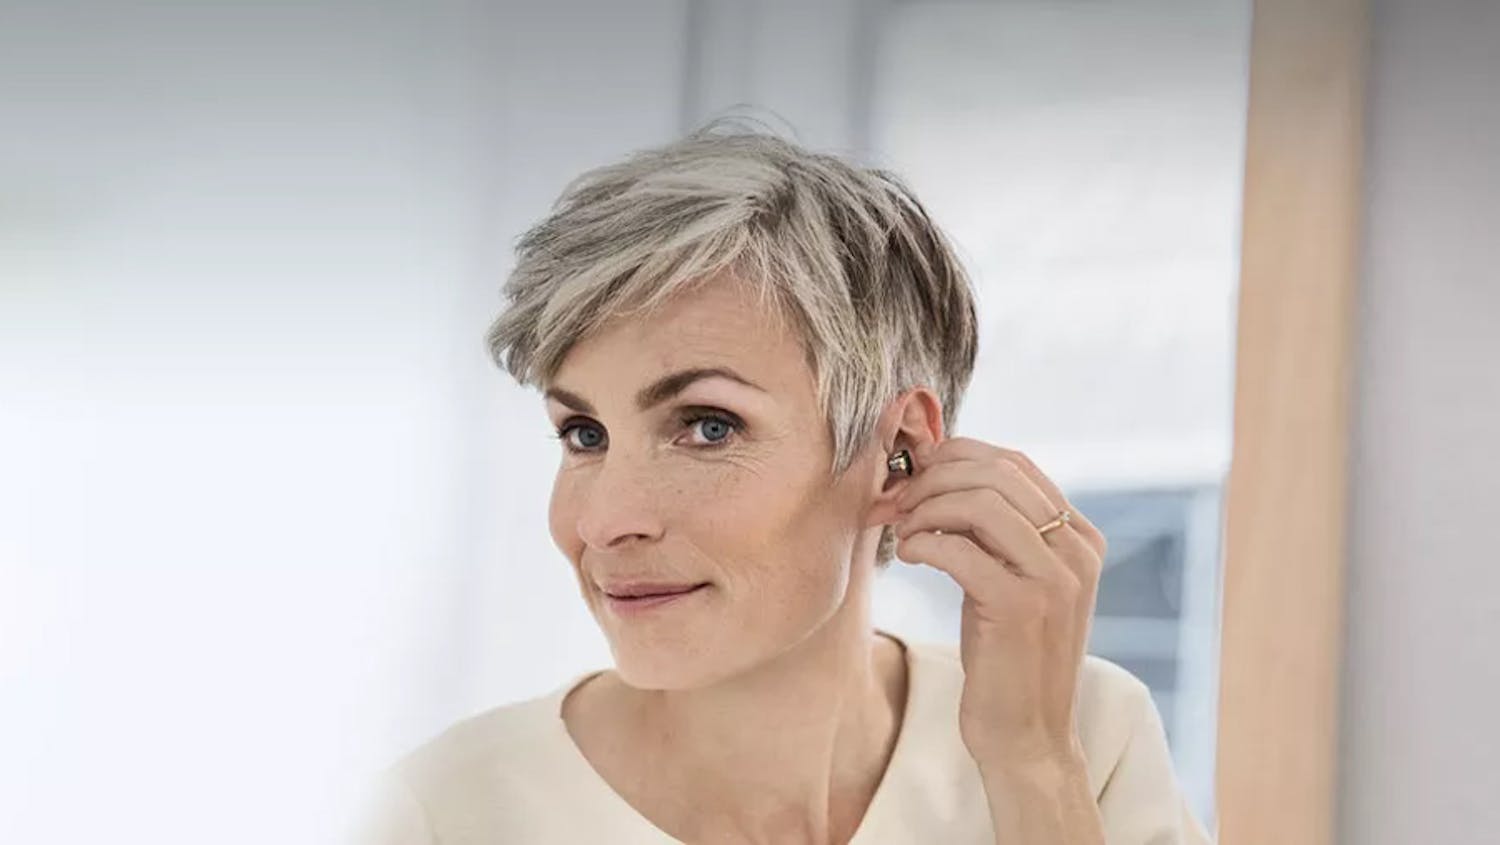 Wearing an Oticon hearing aid